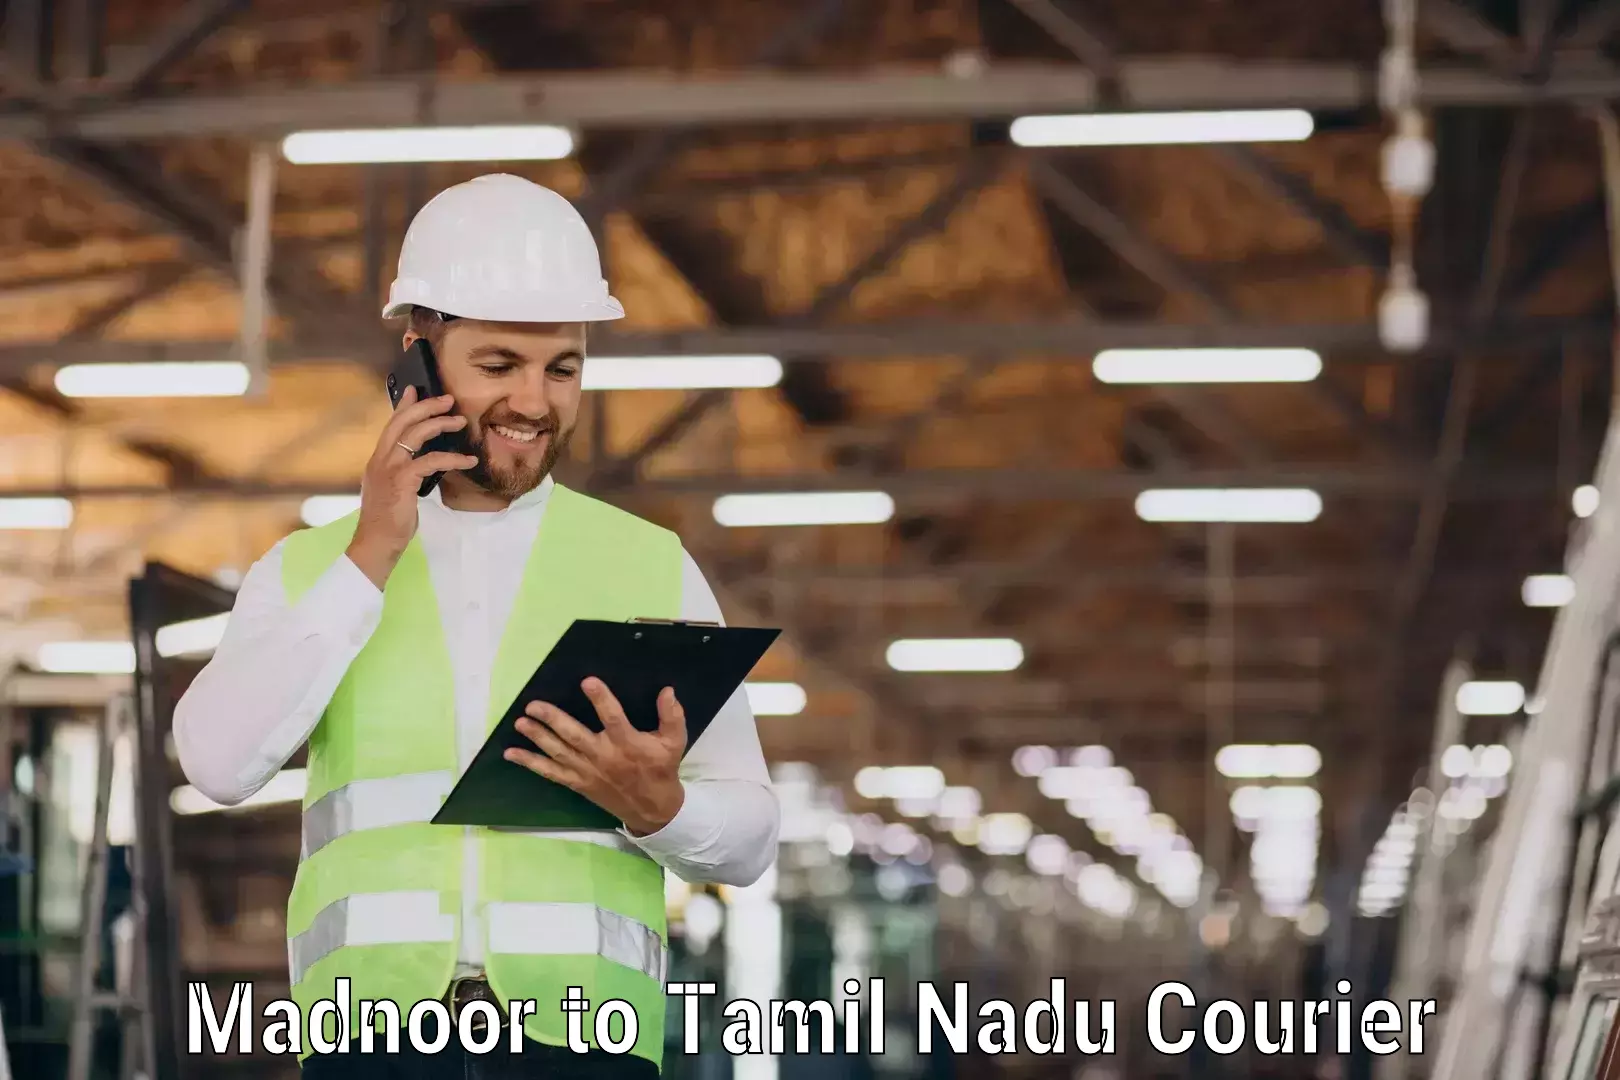 24-hour courier service Madnoor to Cuddalore